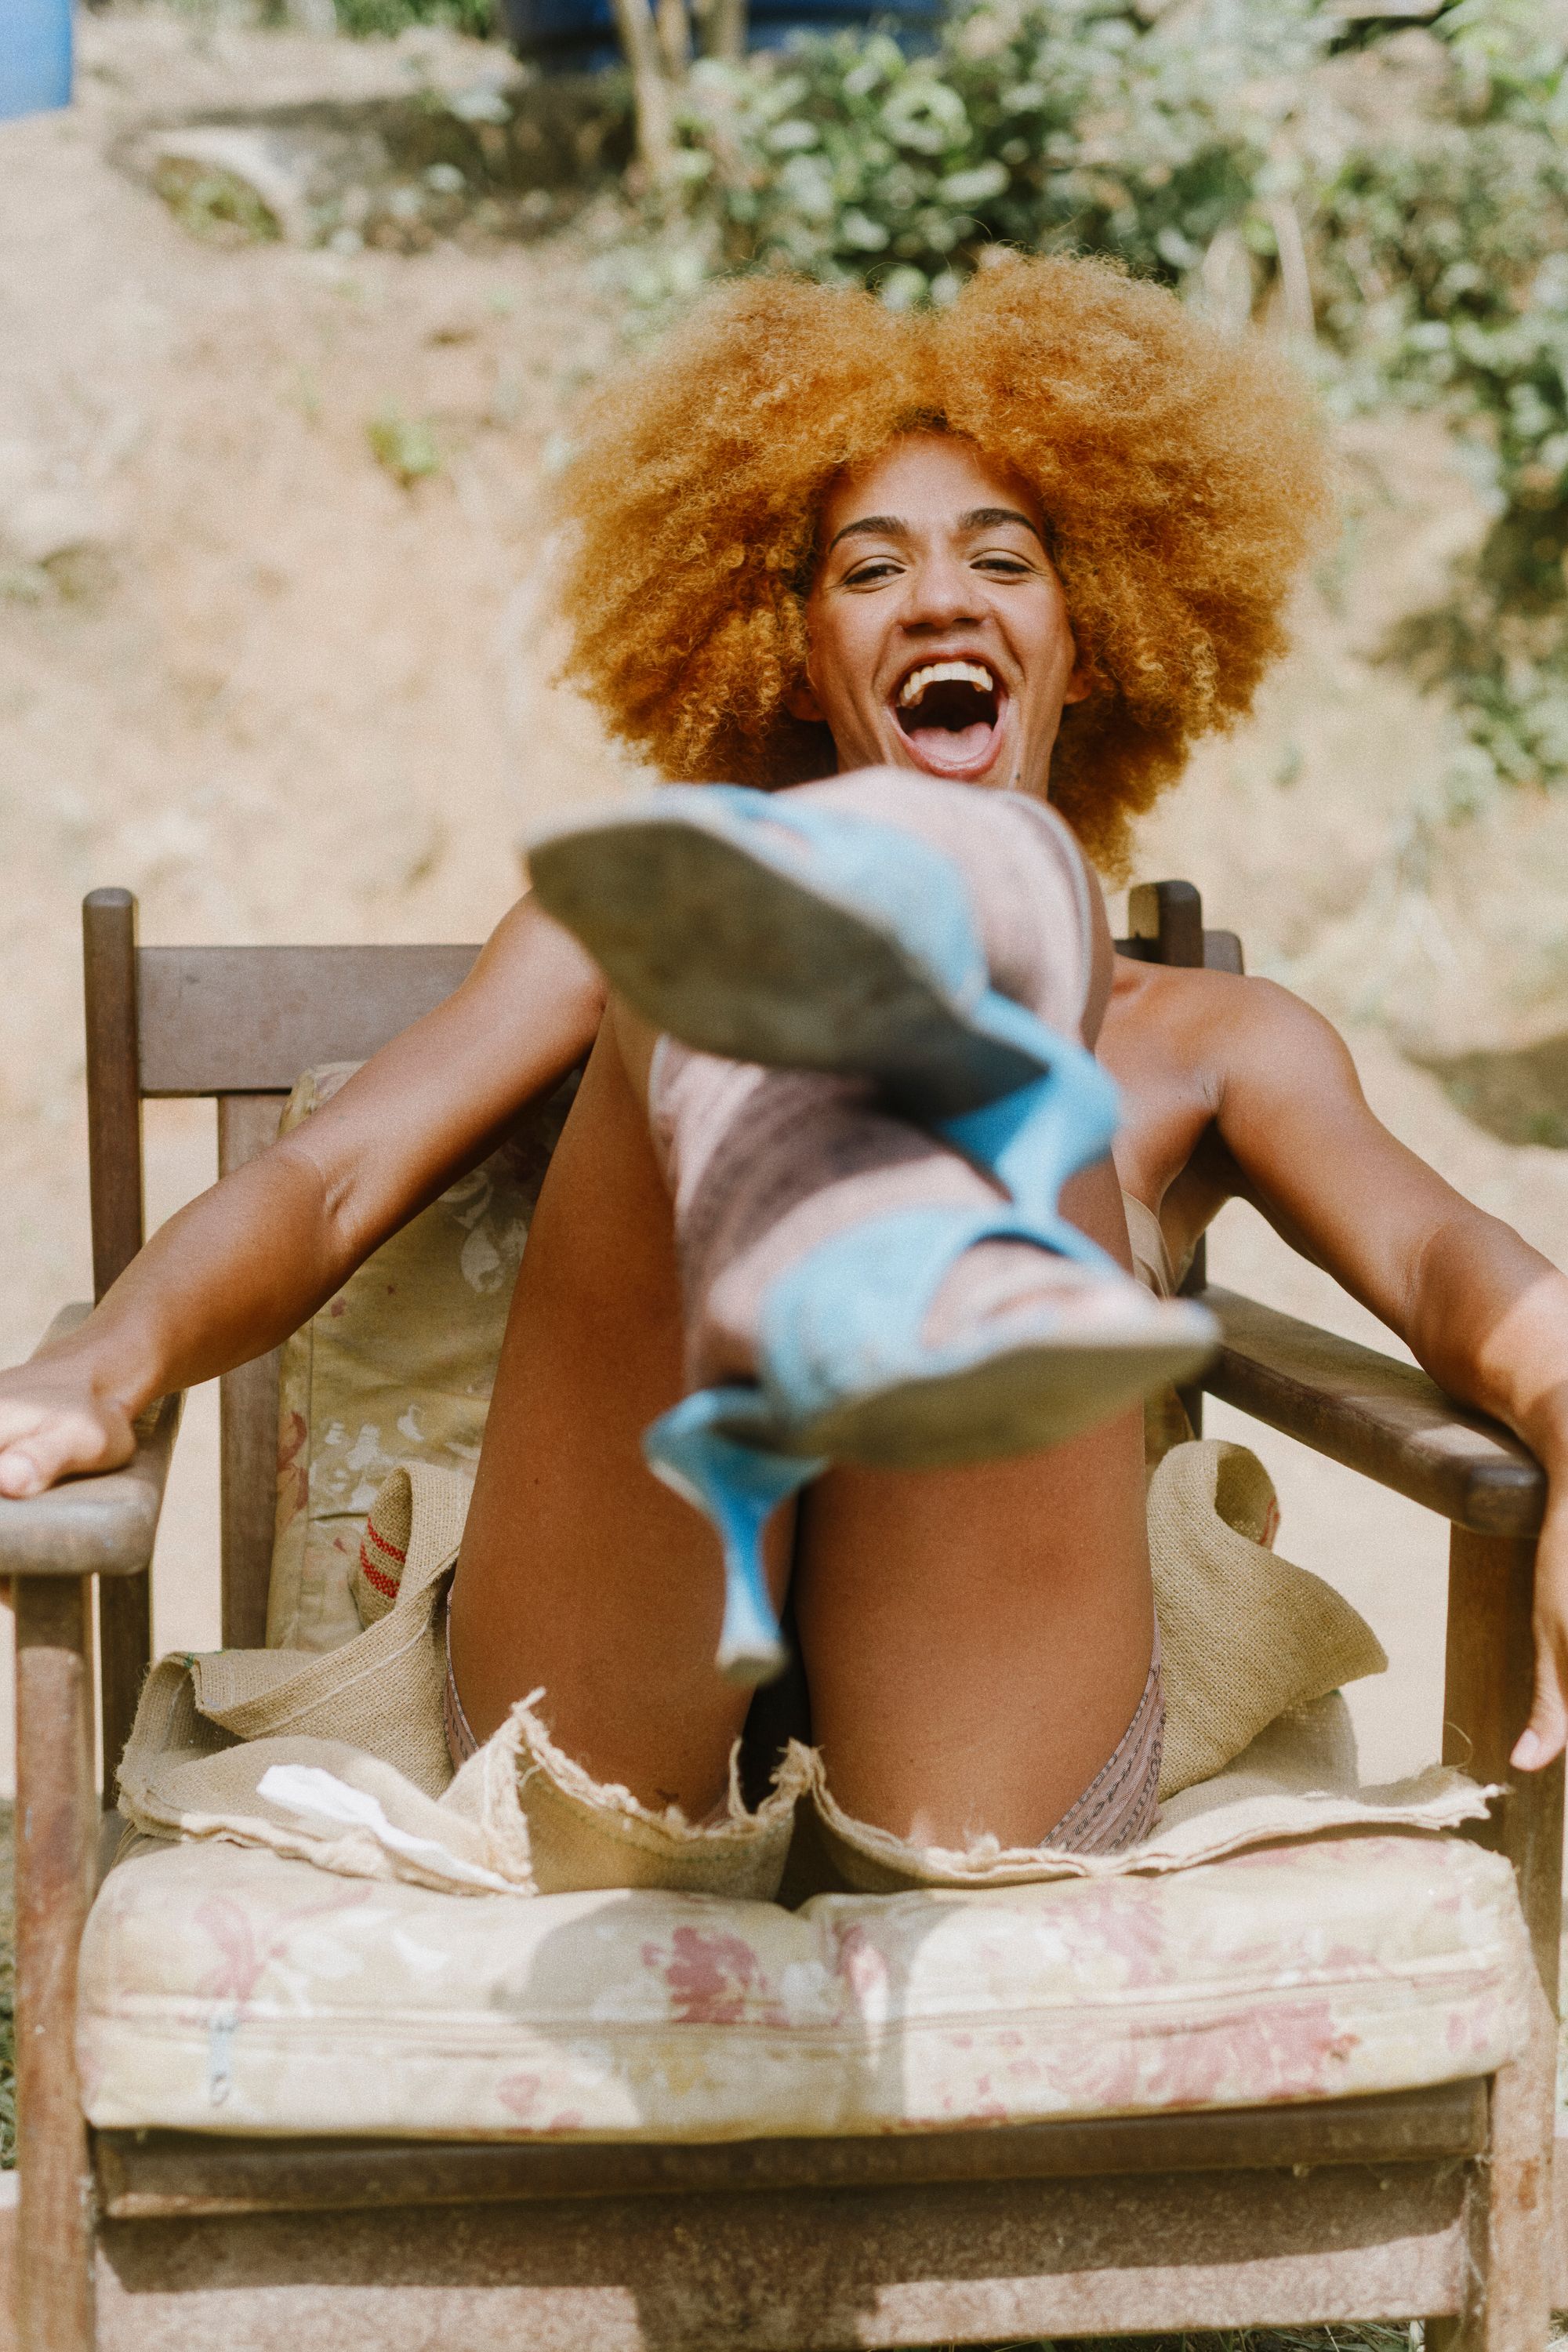 Brasilian travesti with natural red hair, wearing a crystal necklace, is seated on a chair outside in nature, looking at the camera and kicking her foot towards the camera, laughing